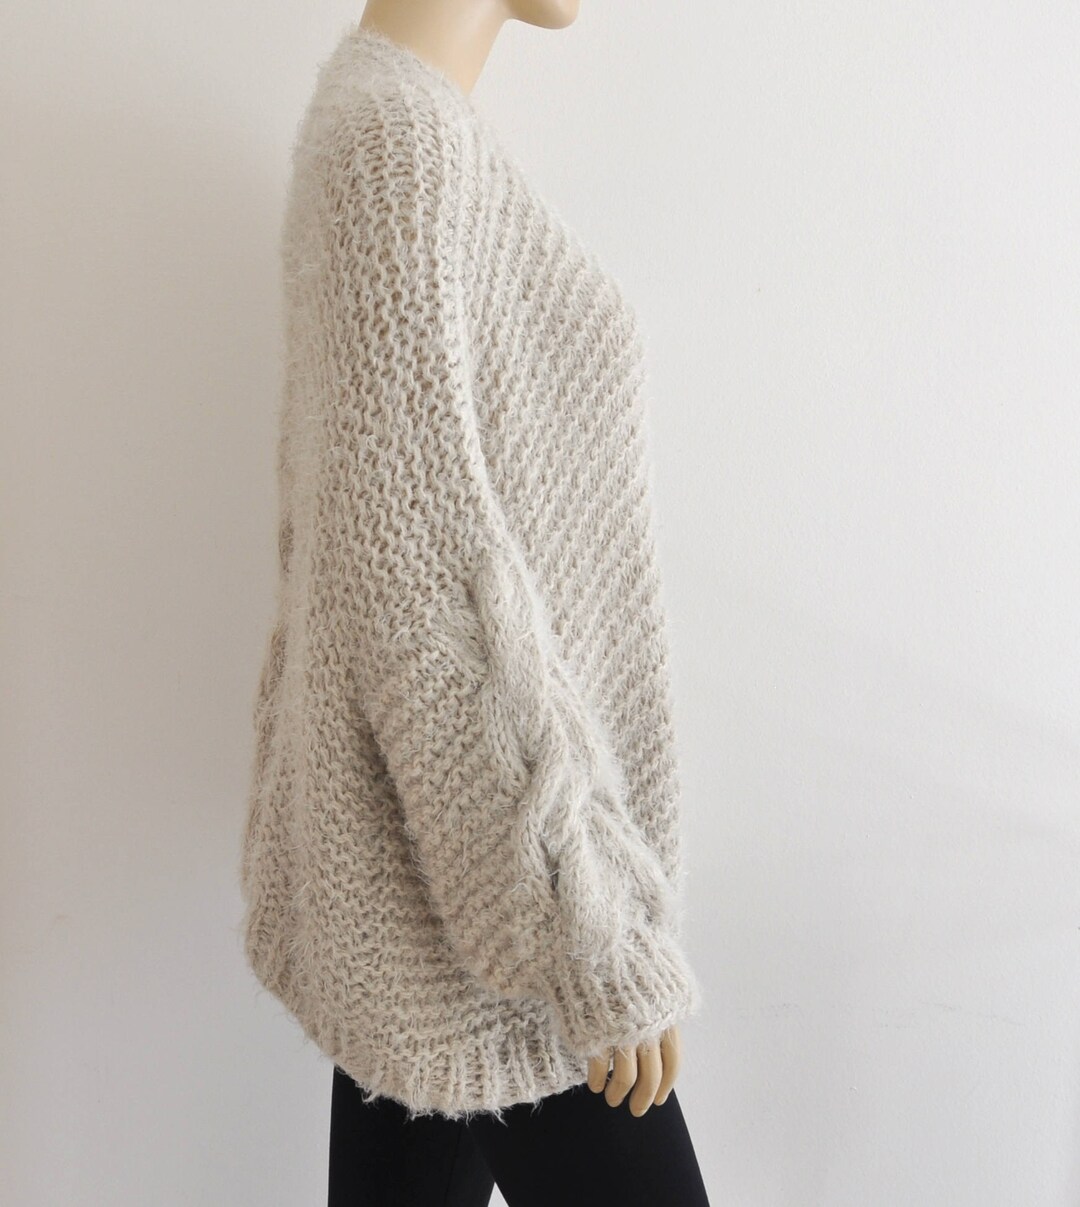 Beige Oversized Cardigan Chunky Cable Knit Jacket Hand Knitted - Etsy